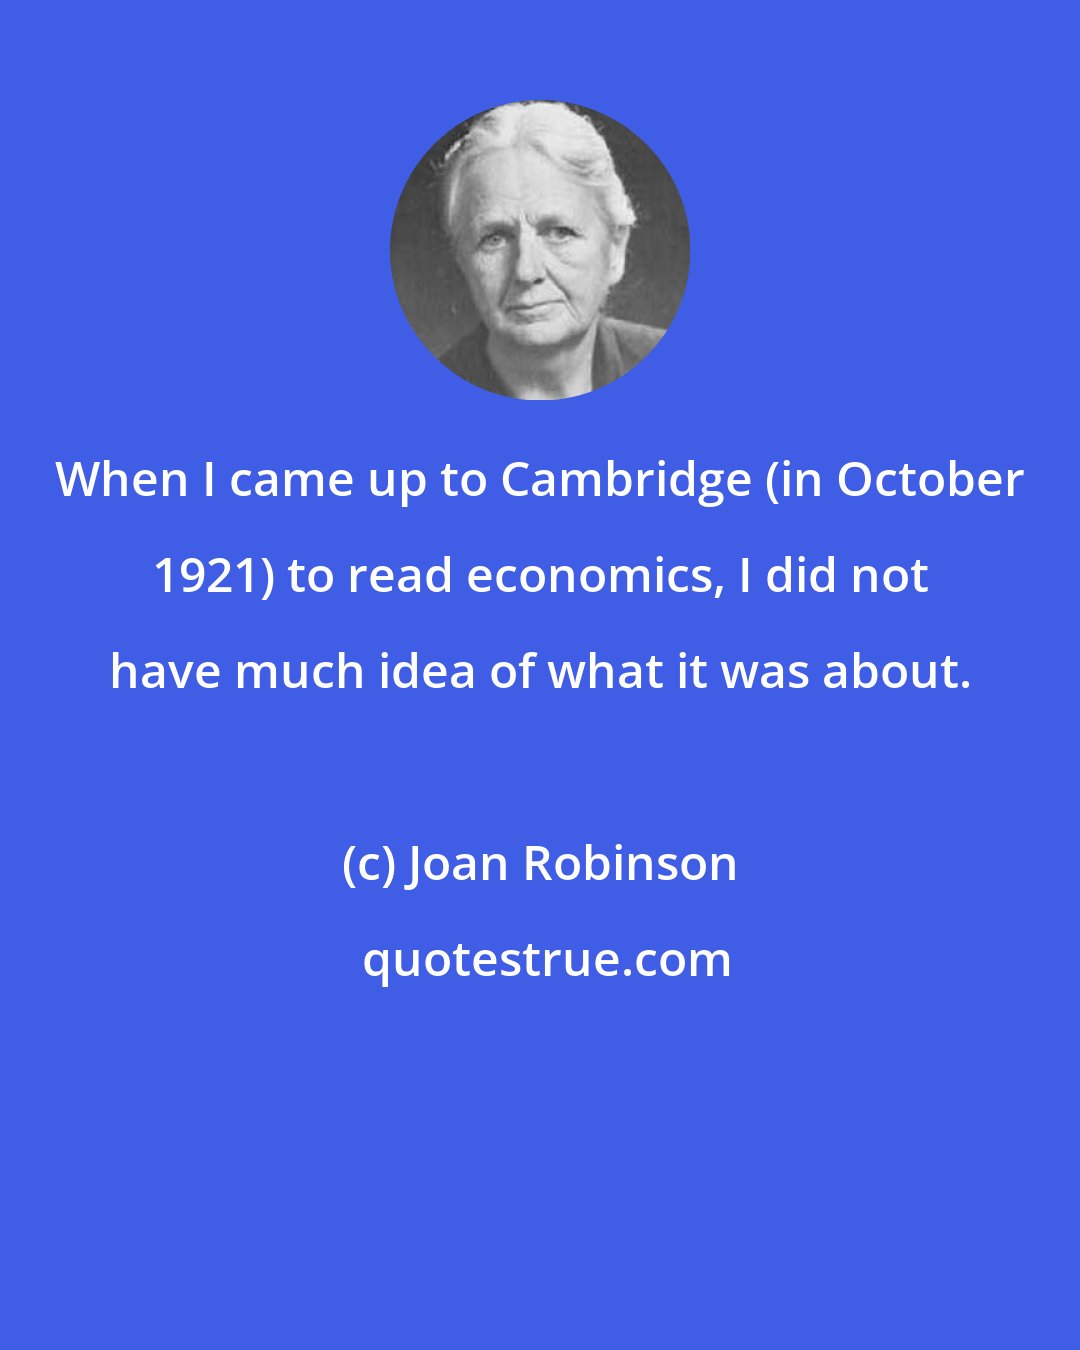 Joan Robinson: When I came up to Cambridge (in October 1921) to read economics, I did not have much idea of what it was about.